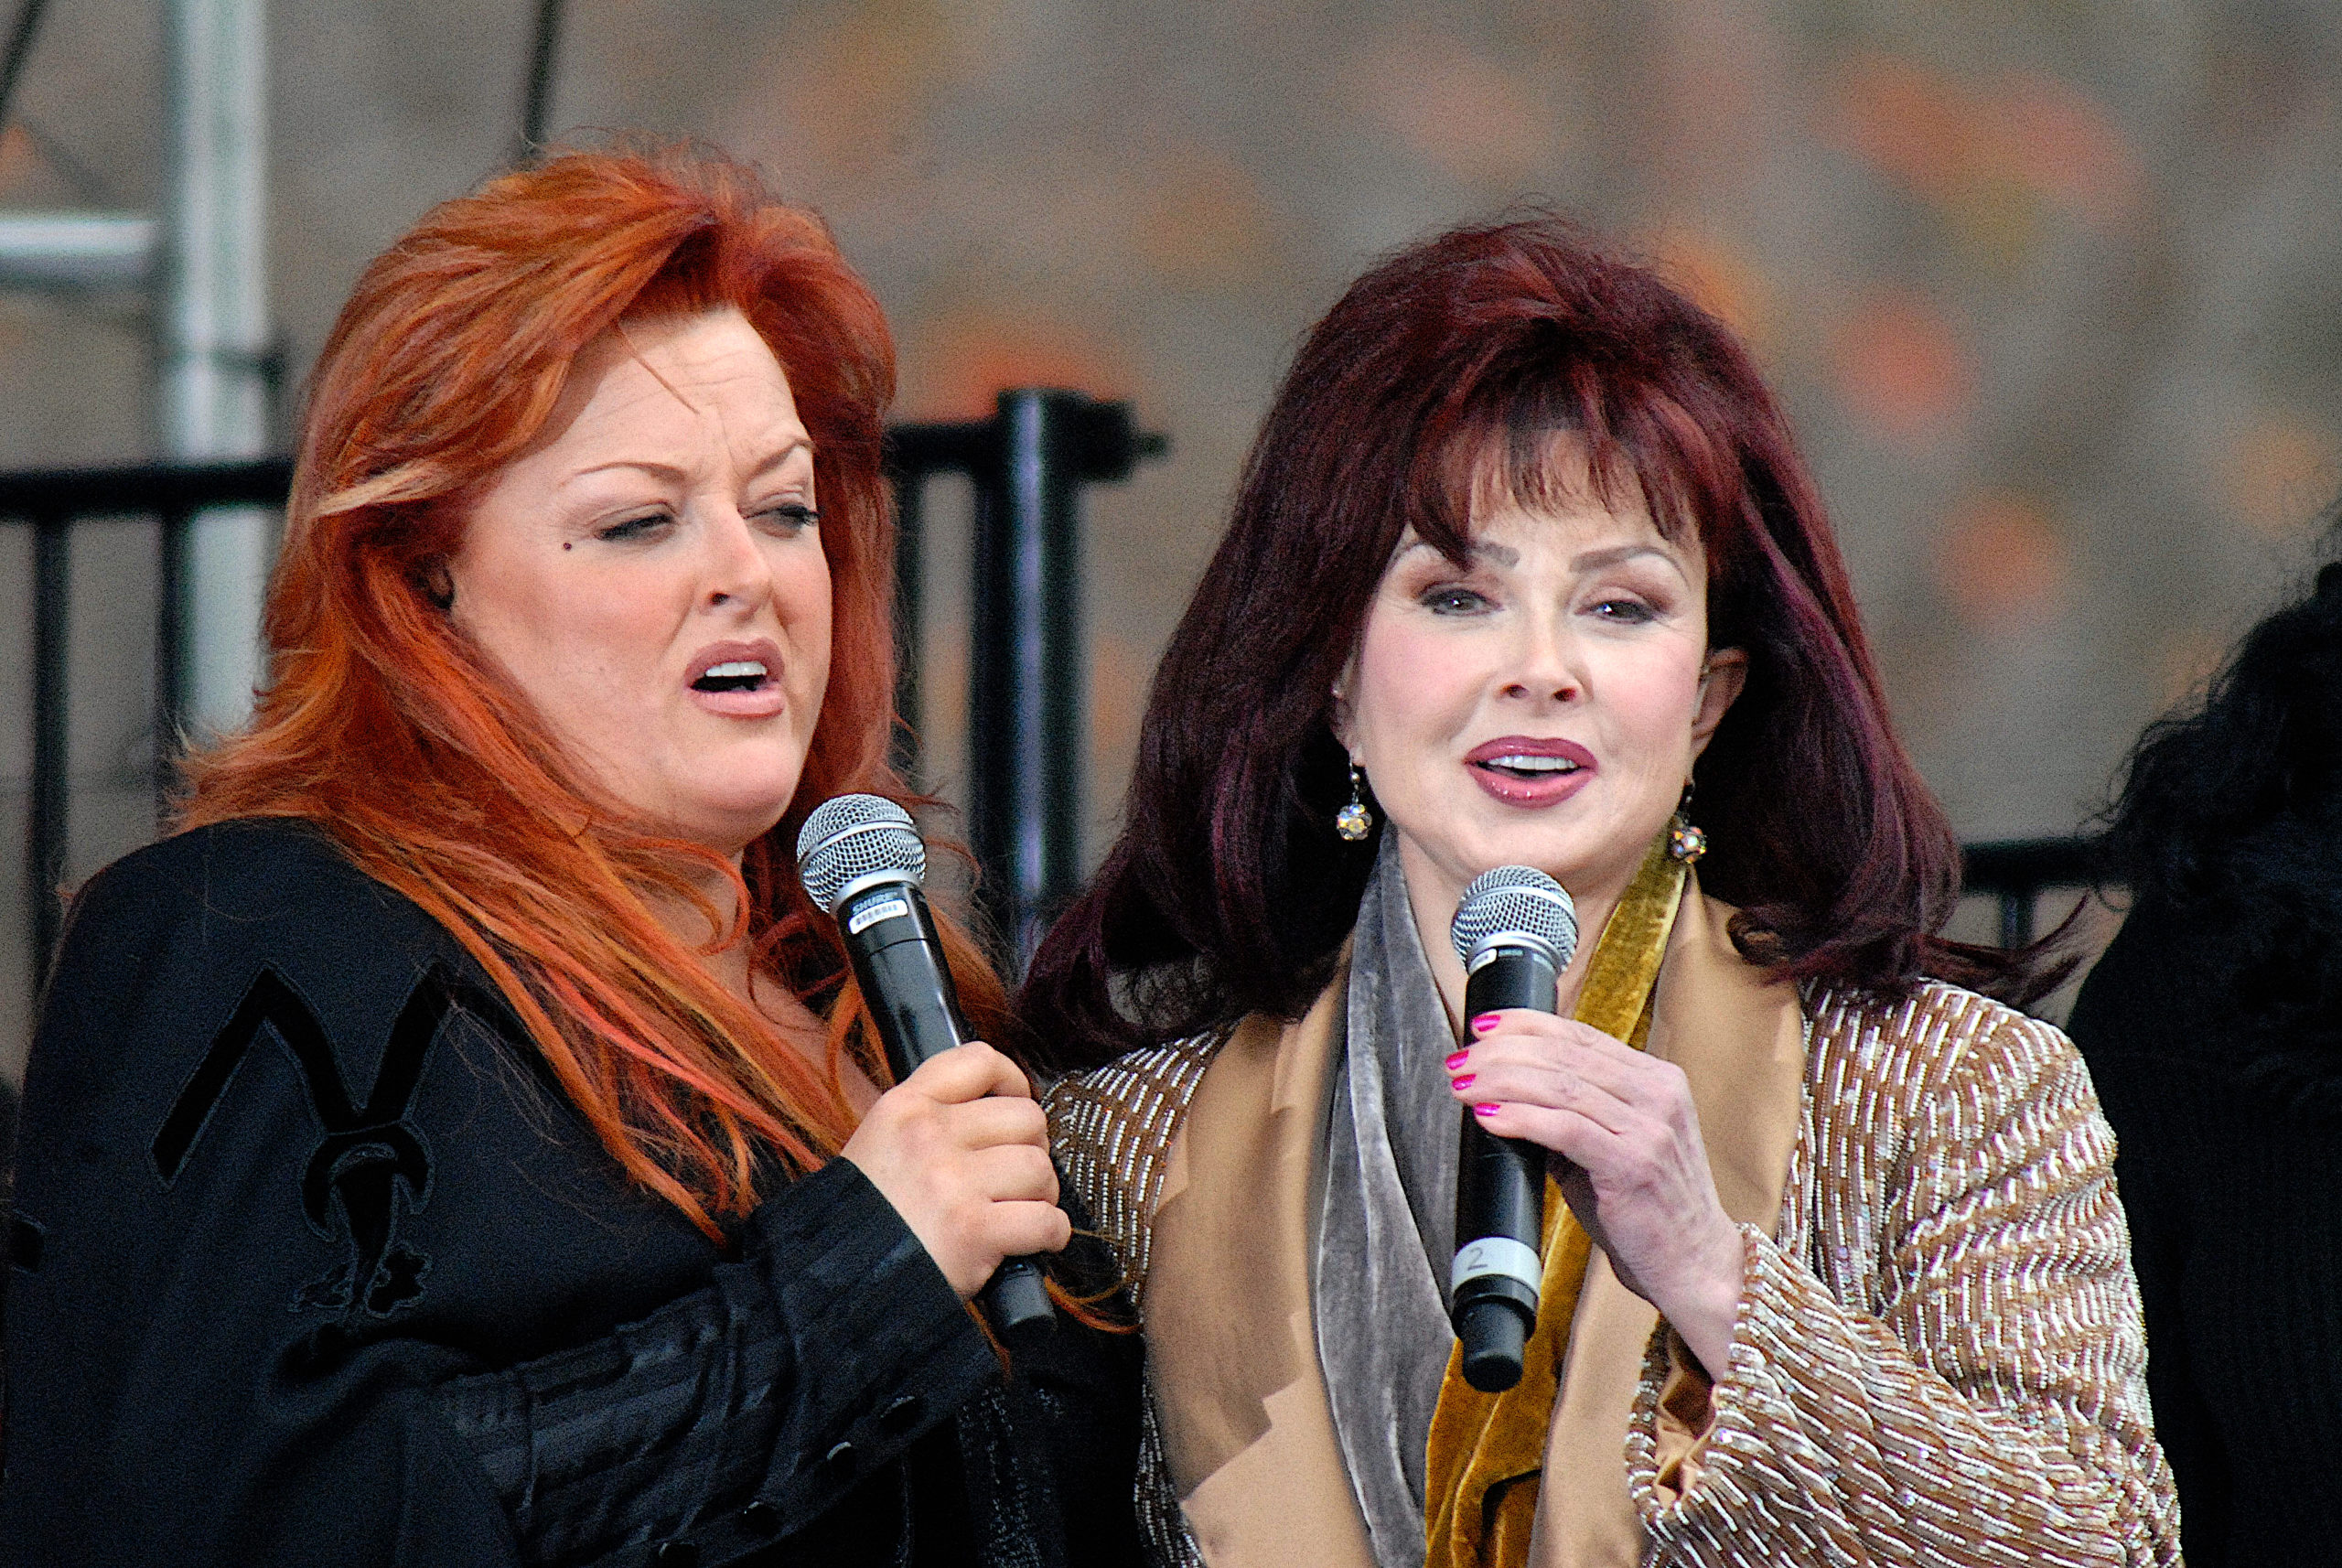 Wynonna Judd Forced to Cancel Last Performance of 2022 | Our thoughts are with Wynonna Judd after she was forced to cancel a New Year’s Eve performance. On December 31, the last day of 2022, Wynonna Judd was set to cap off a particularly difficult year with a performance featuring fellow Country superstar Kelsea Ballerini.